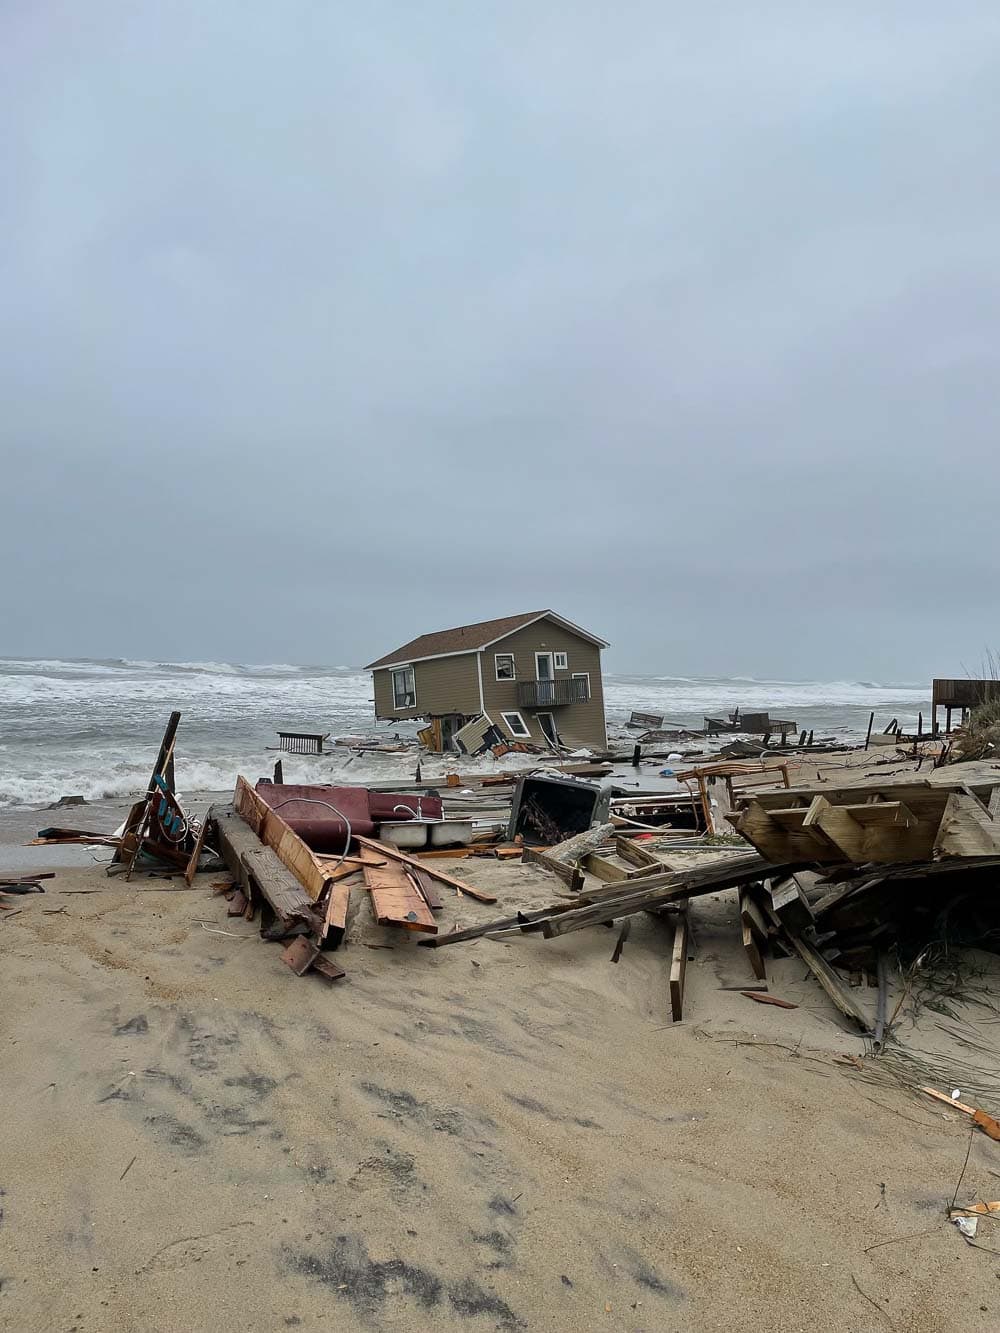 Collapsed house at 24265 Ocean Dr, Rodanthe, NC 05-10-2022 - Image credit NPS